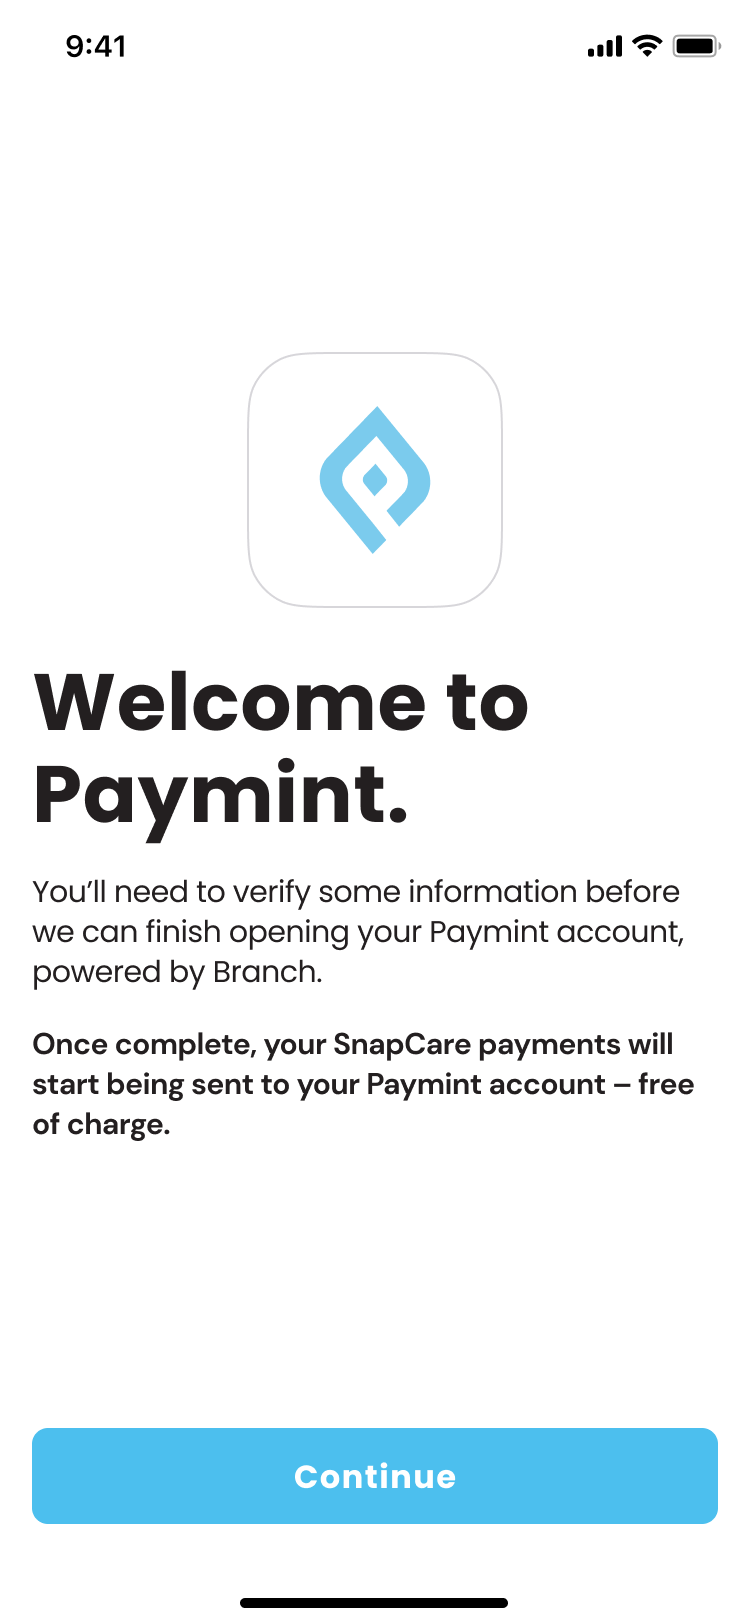 snapcare-updatedss-welcome-to-paymint-screen.png